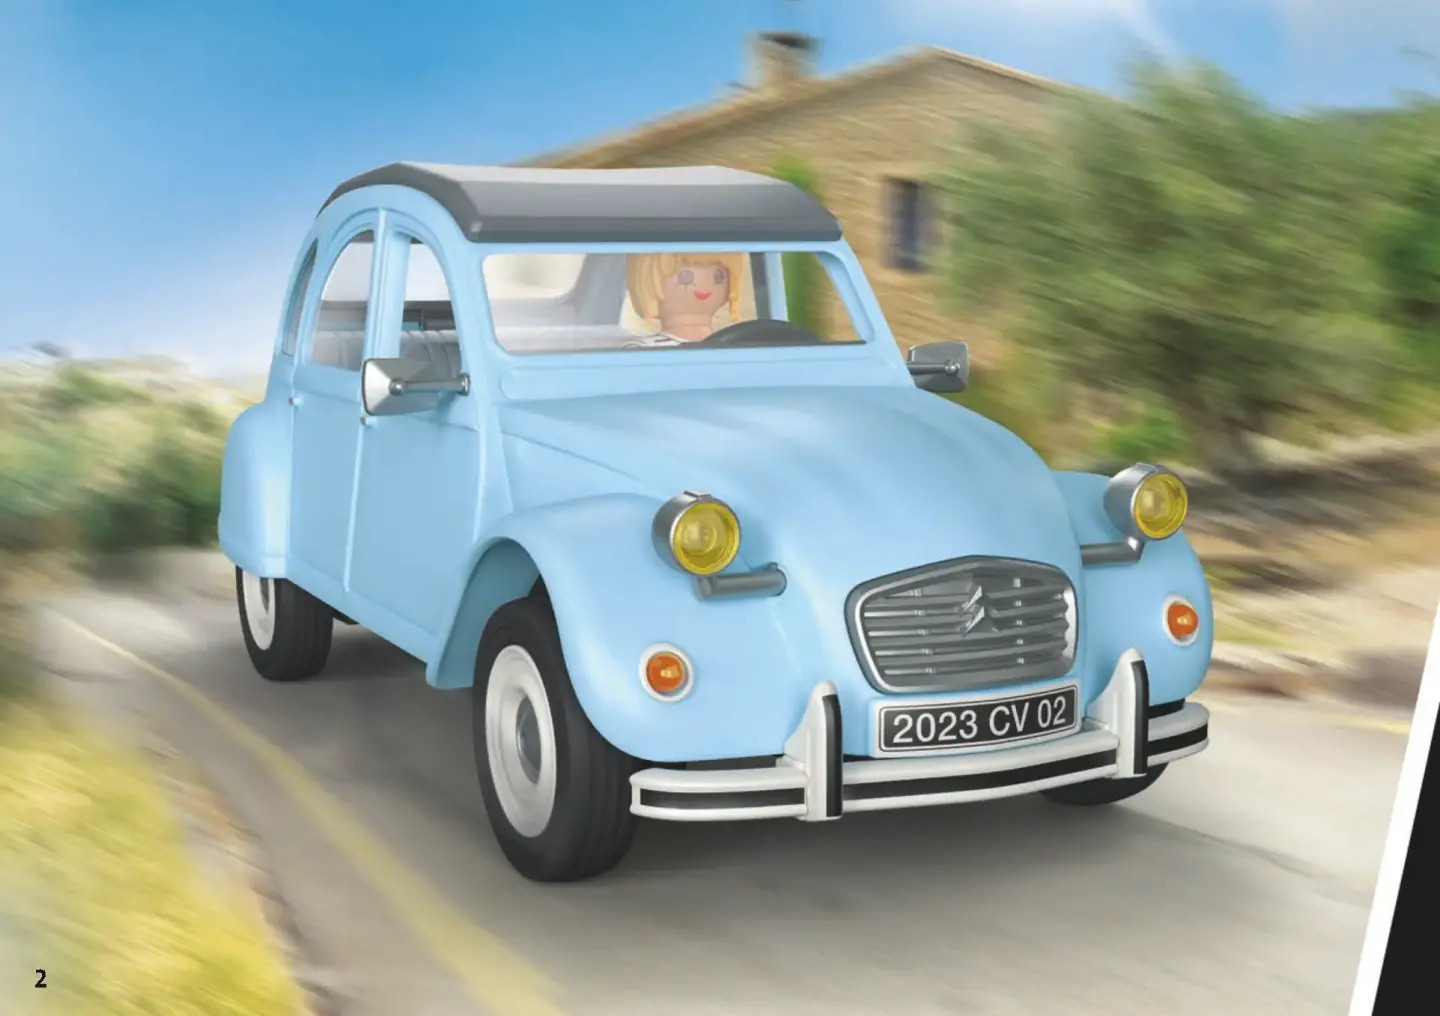 Citroën on X: It's small enough to hold in your hand, but big enough to  imagine the adventures you want. The Citroën 2CV Playmobil is now available  on our Citroën Lifestyle website !